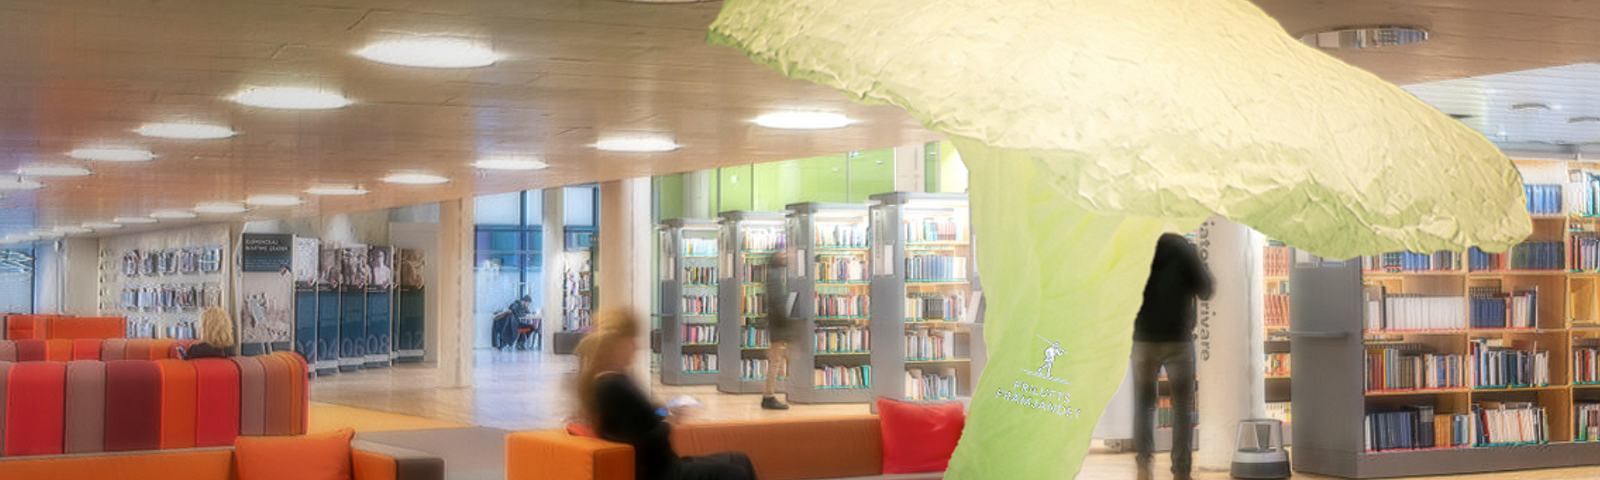 Image of a constructed breathing tree in paper added to an image of the Södertörn University library.